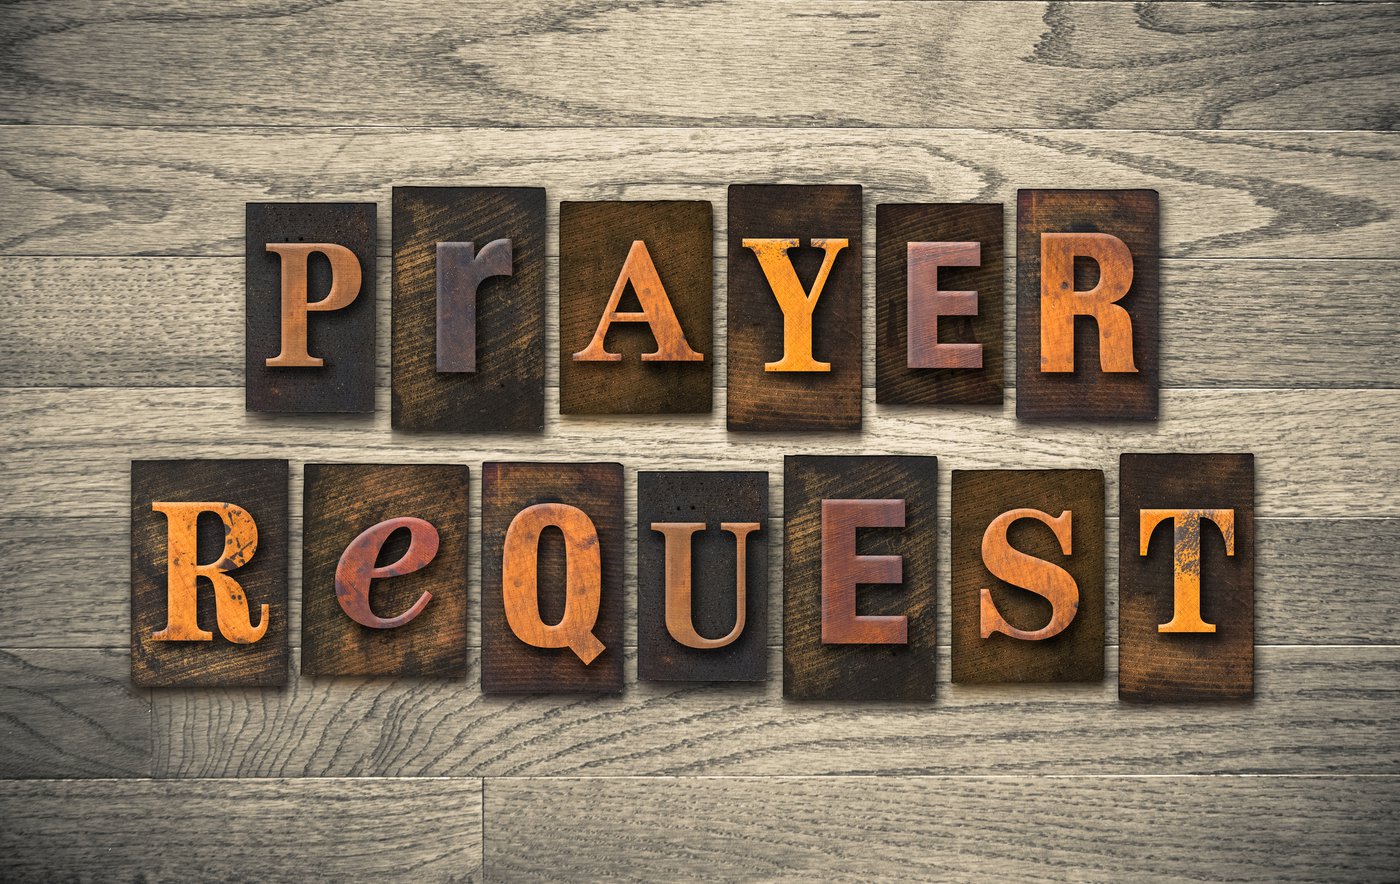 Click the Image to Submit your Prayer Request